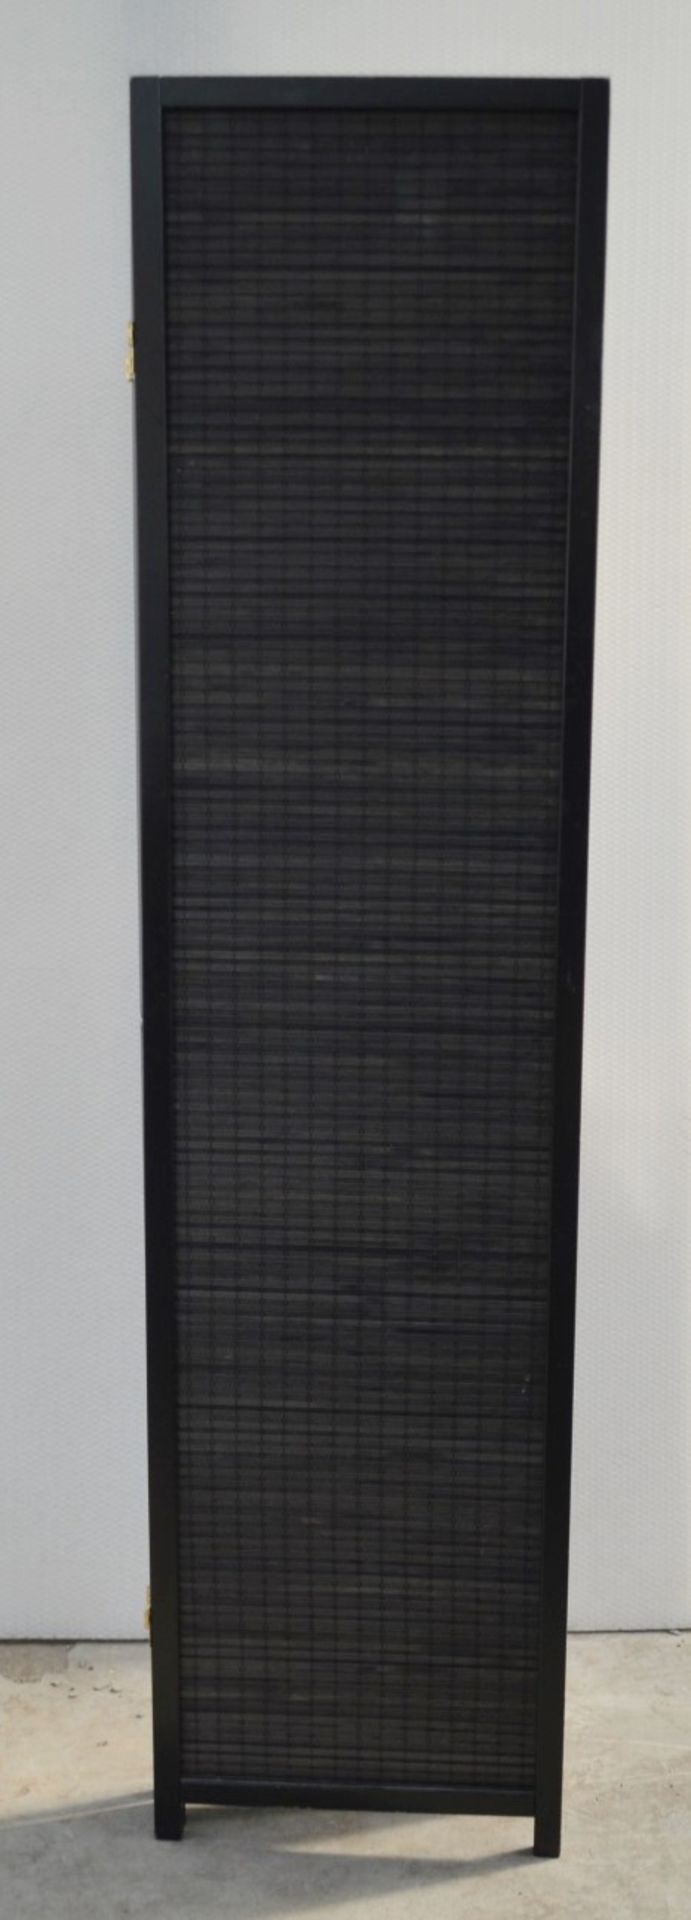 1 x 4-Panel Dressing Screen In Black - Dimensions: Height 180 x Max.Width 180cm - Ref: MHB115 - - Image 2 of 4